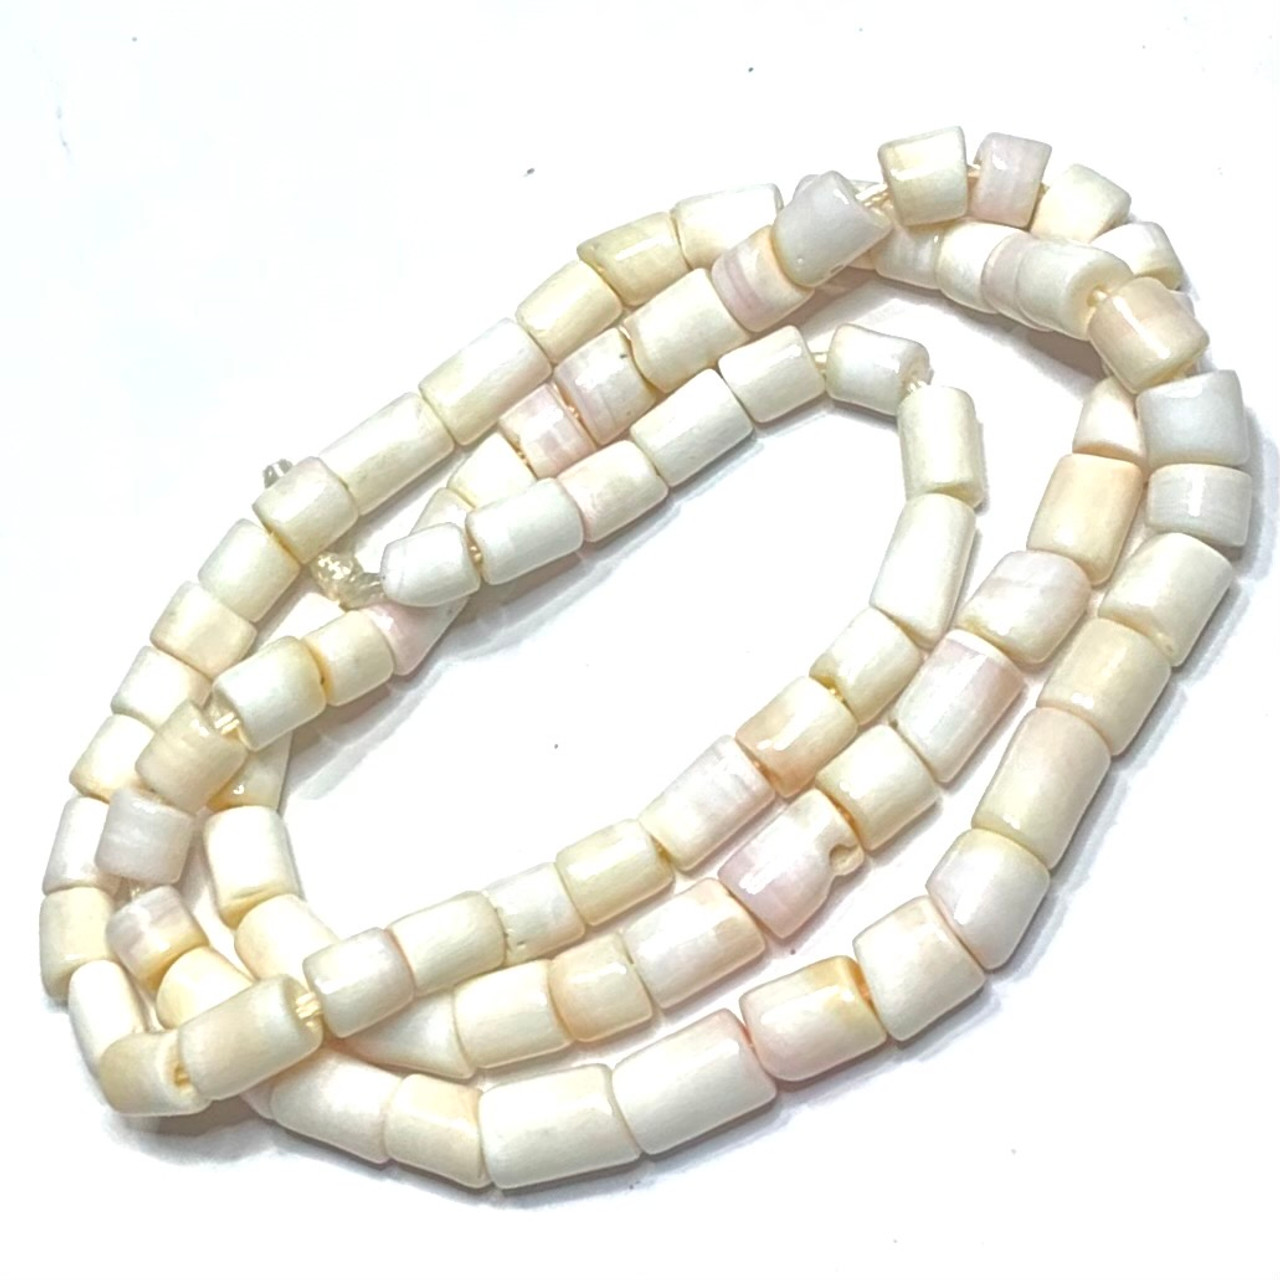 Genuine Italian Natural White Coral with a Hint of Pink-Gently Graduated  4-7mm Avg.